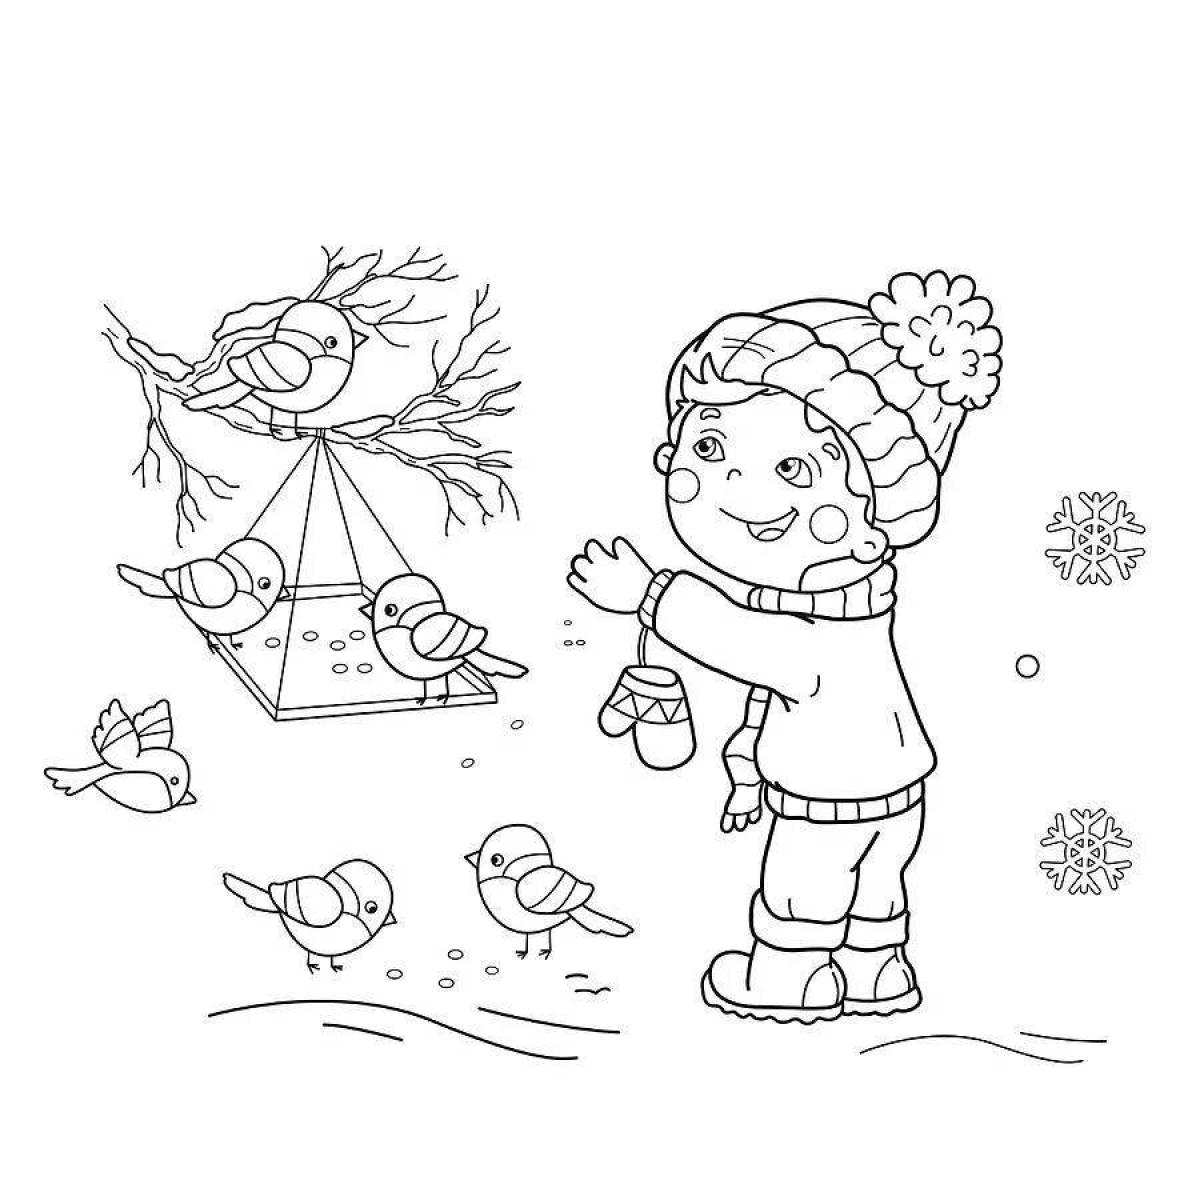 Grandiloquent coloring page bird feeding in winter